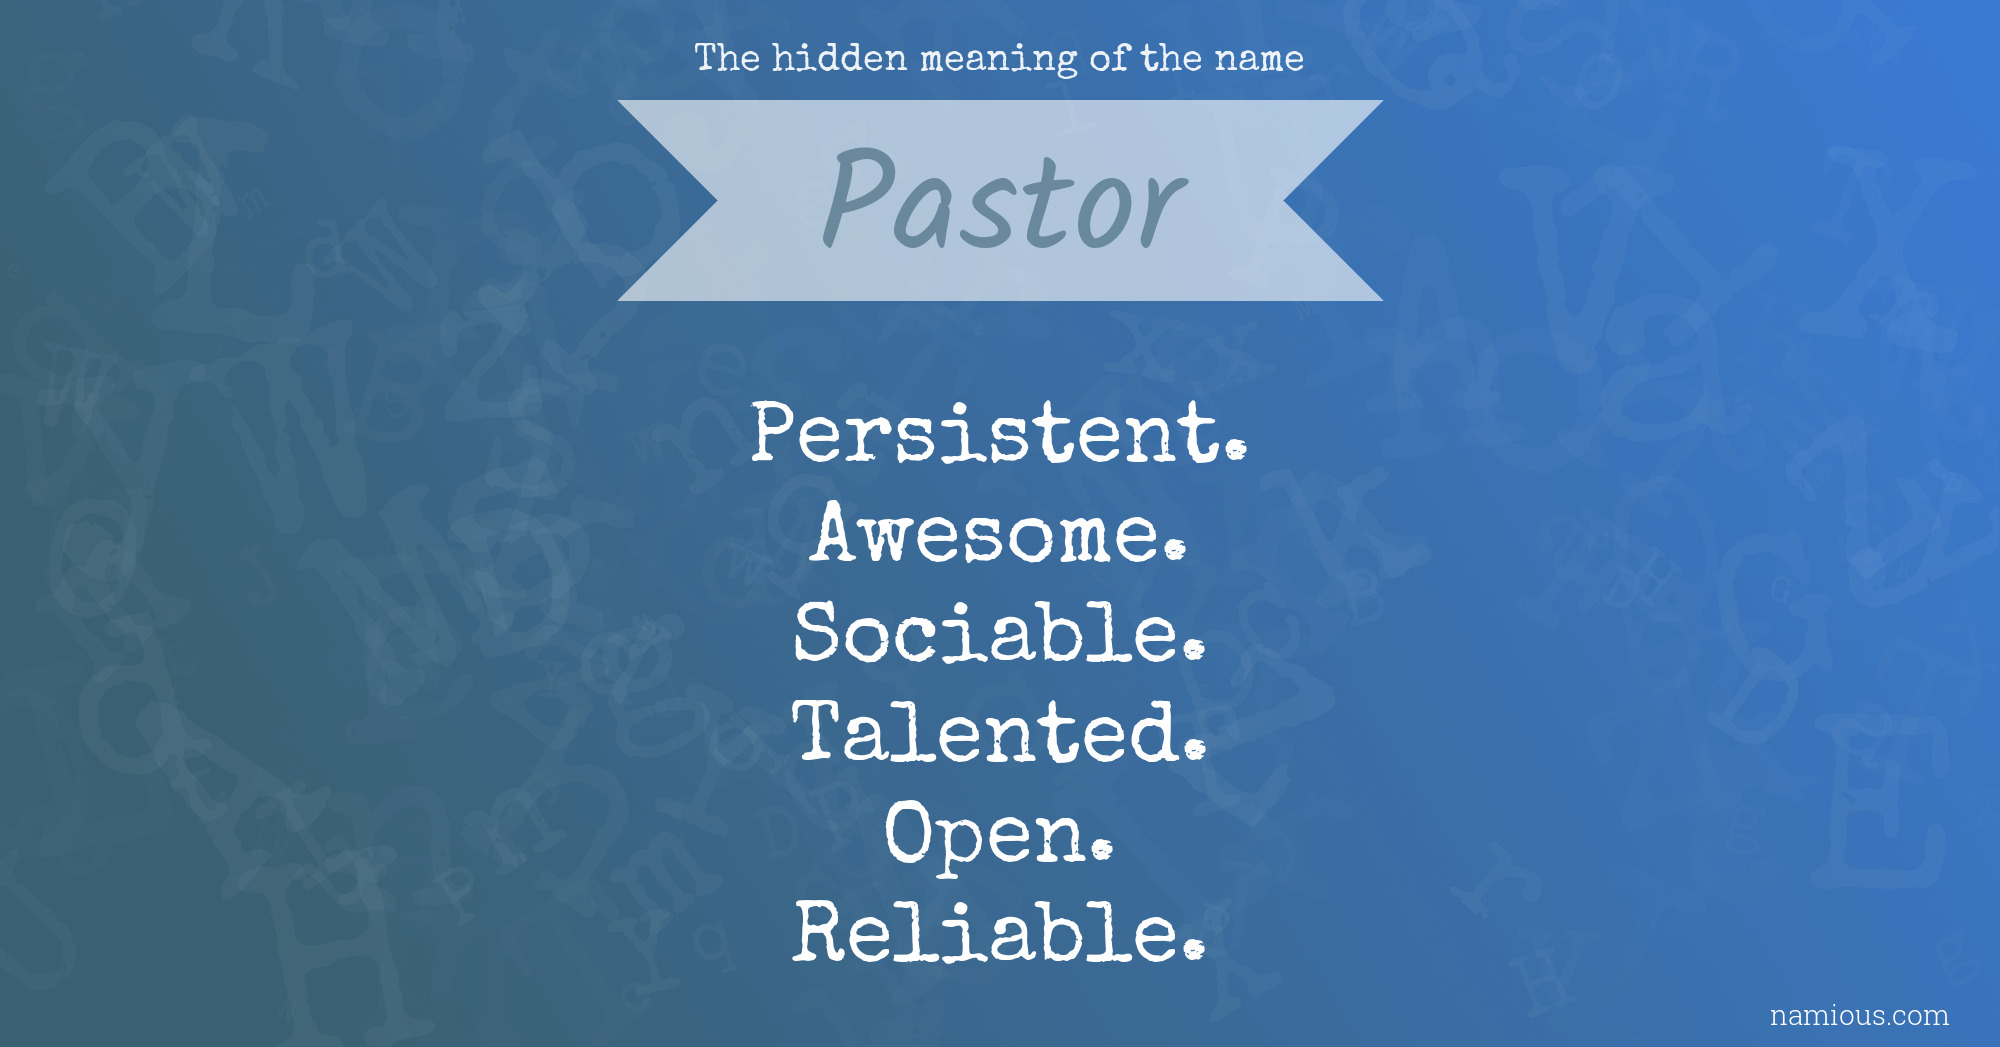 The hidden meaning of the name Pastor